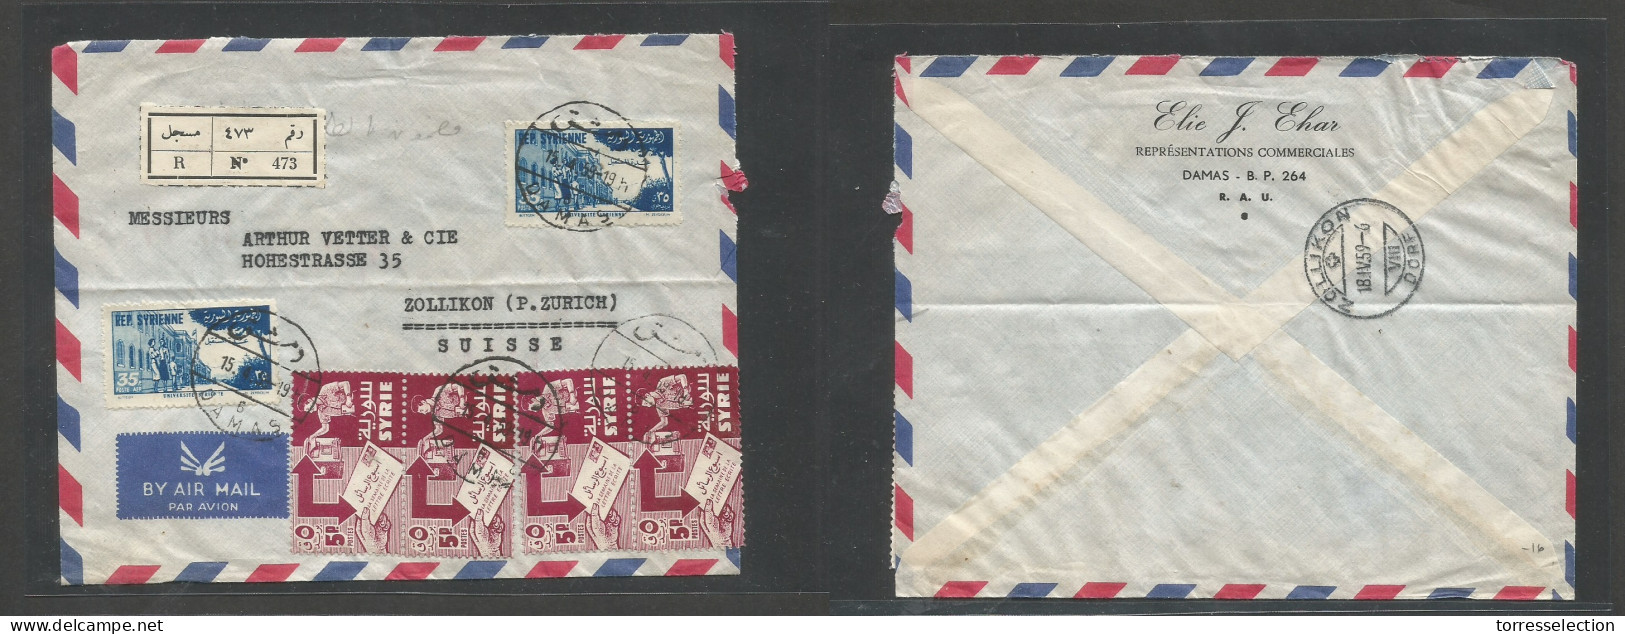 SYRIA. 1959 (15 Apr) Damas - Switzerland, Zellikon (18 April) Registered Air Mixed Issues Multifkd Envelope At 90p Rate, - Syrie